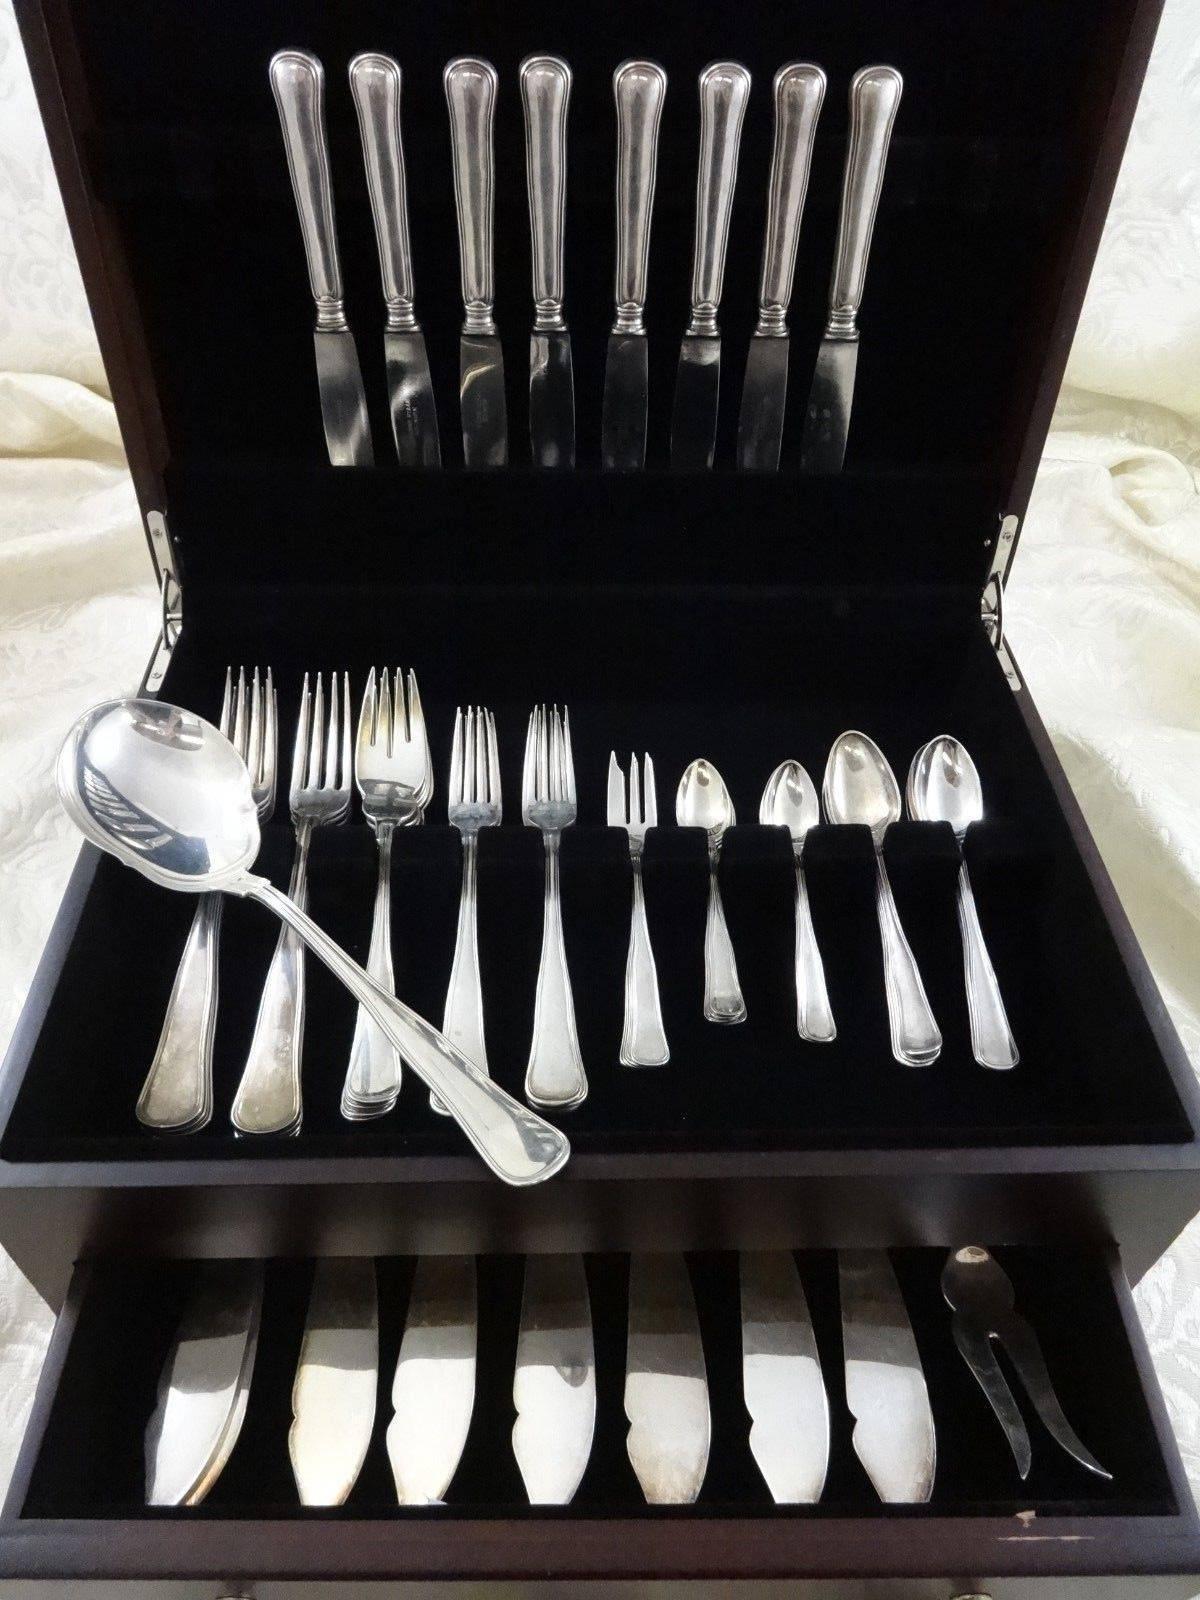 Old Danish by Cohr Danish sterling silver flatware set of 66 pieces. This pattern has a great modern design! This set includes:

Eight knives, 8 3/8